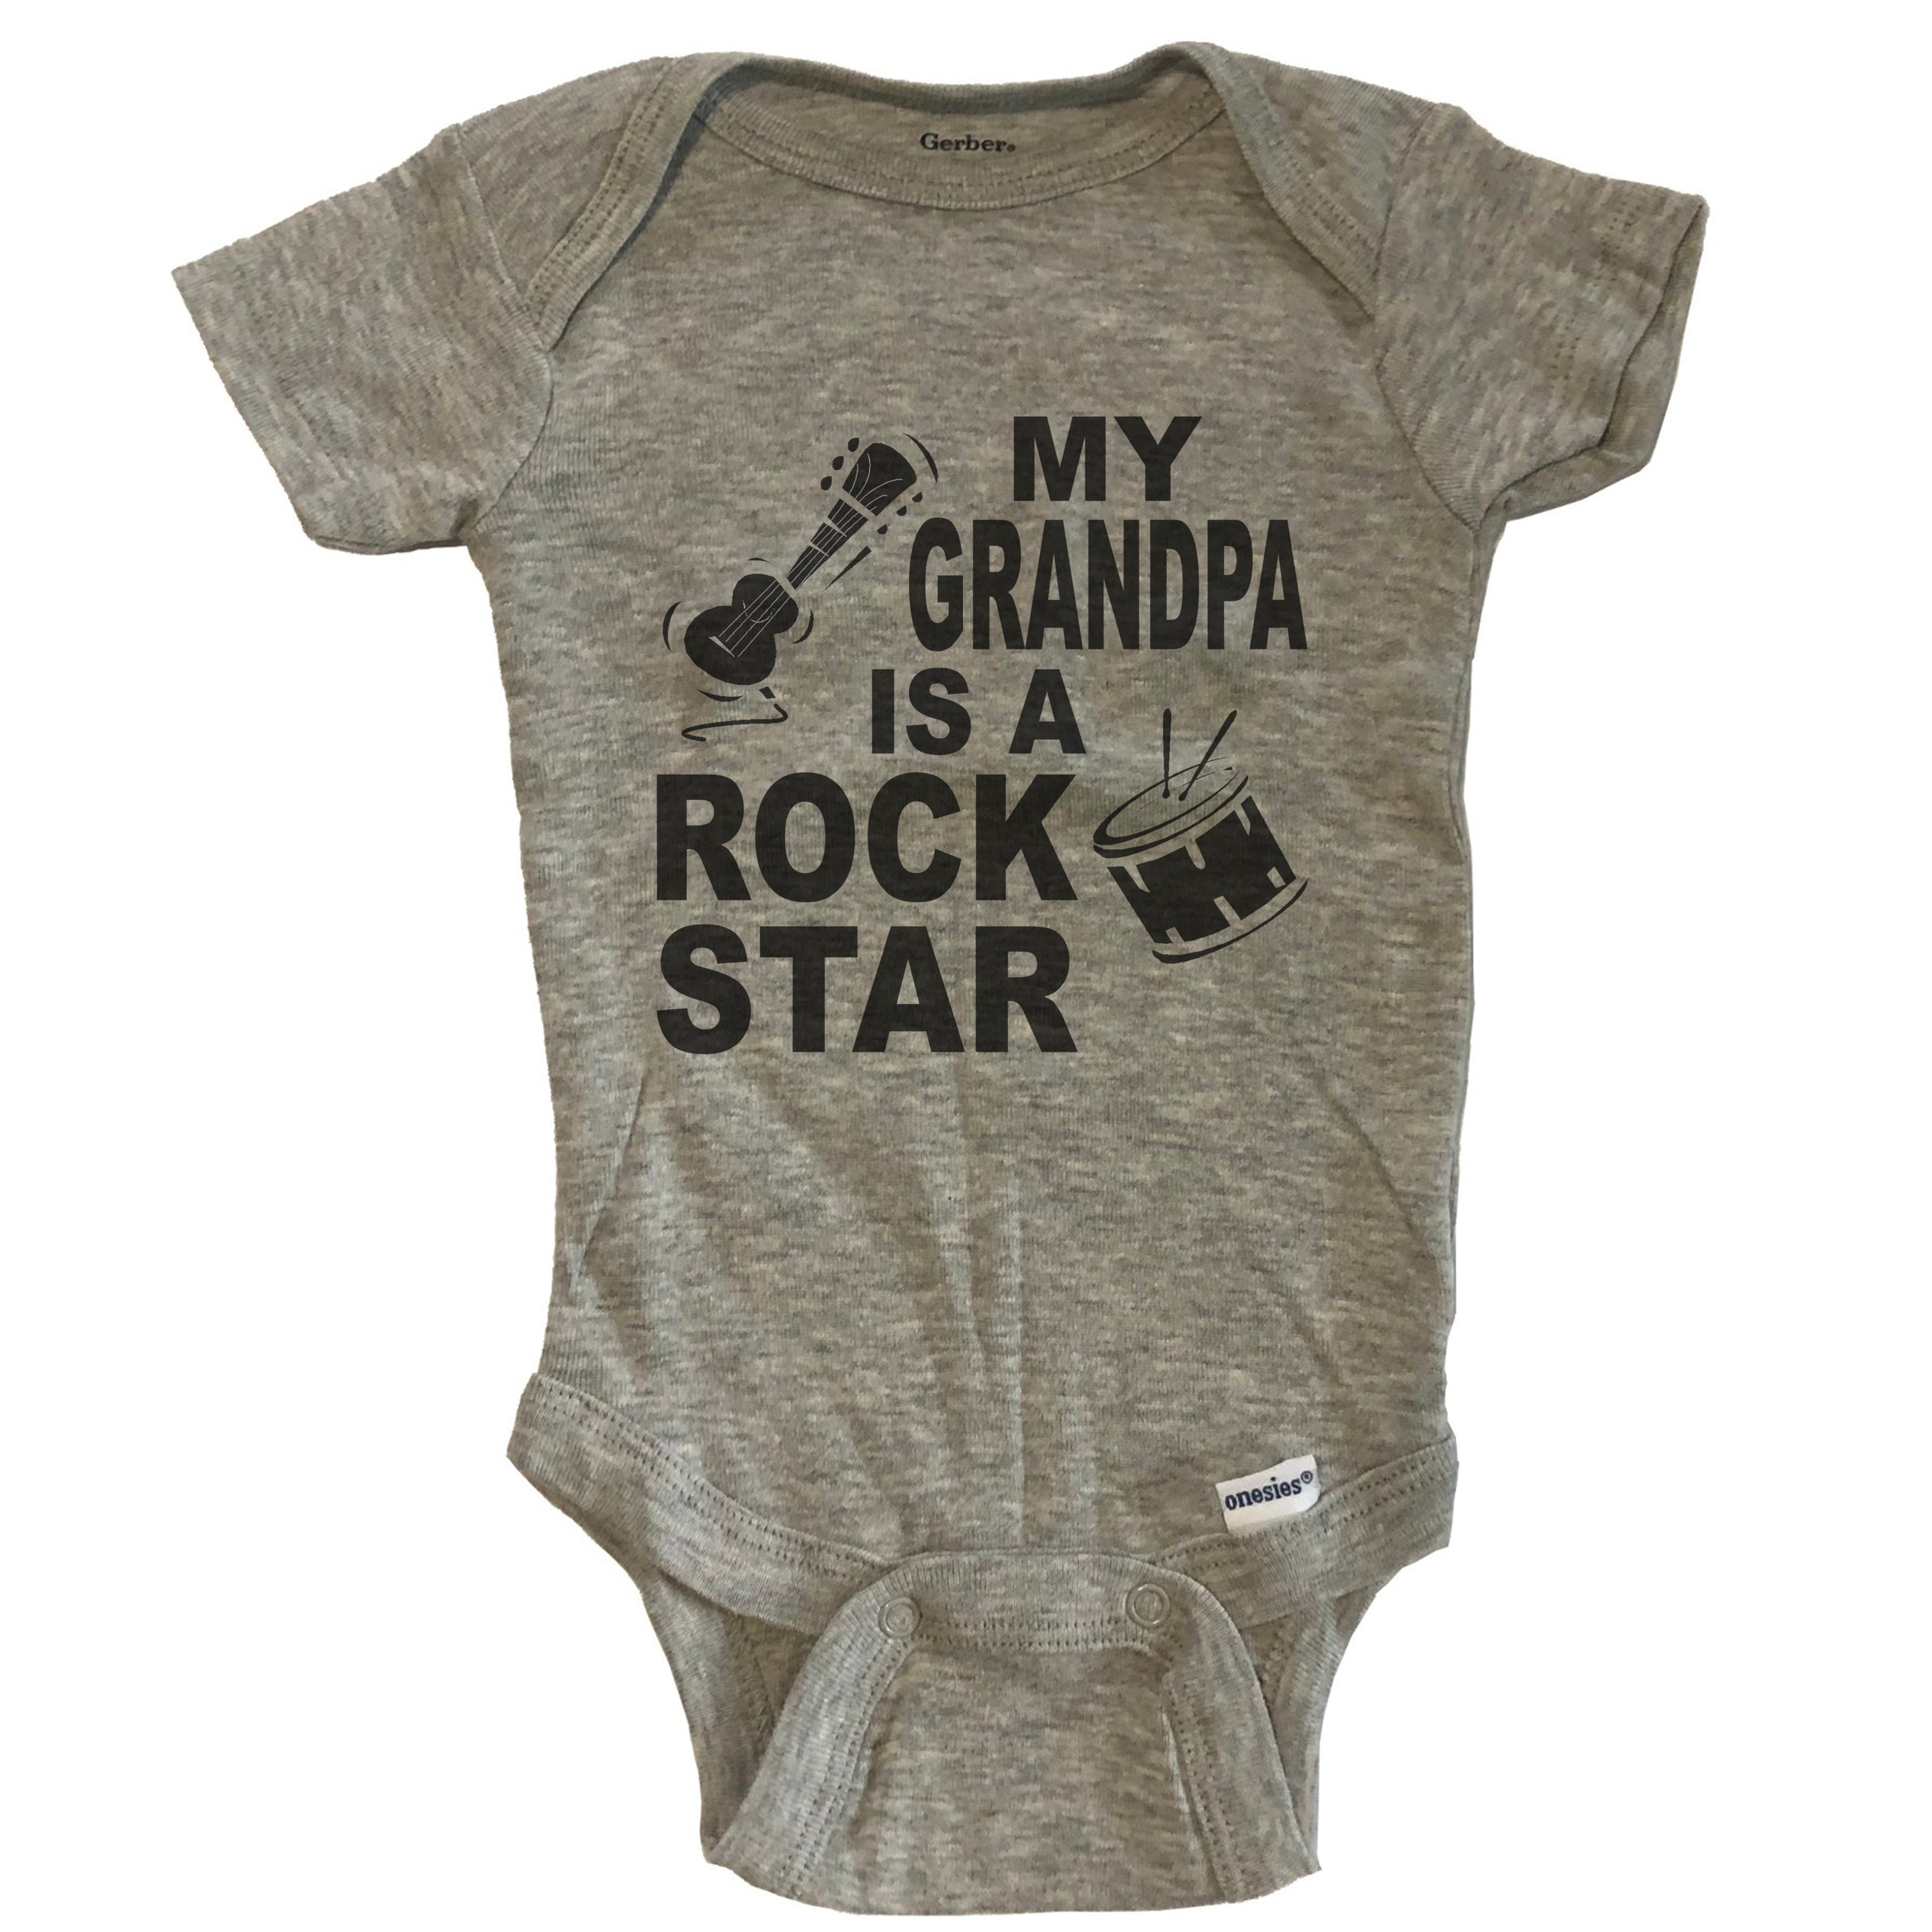 I LOVE MY GRANDAD TO THE MOON AND BACK CUTE POPS PAPPA BABY BODY VEST BABY GRO